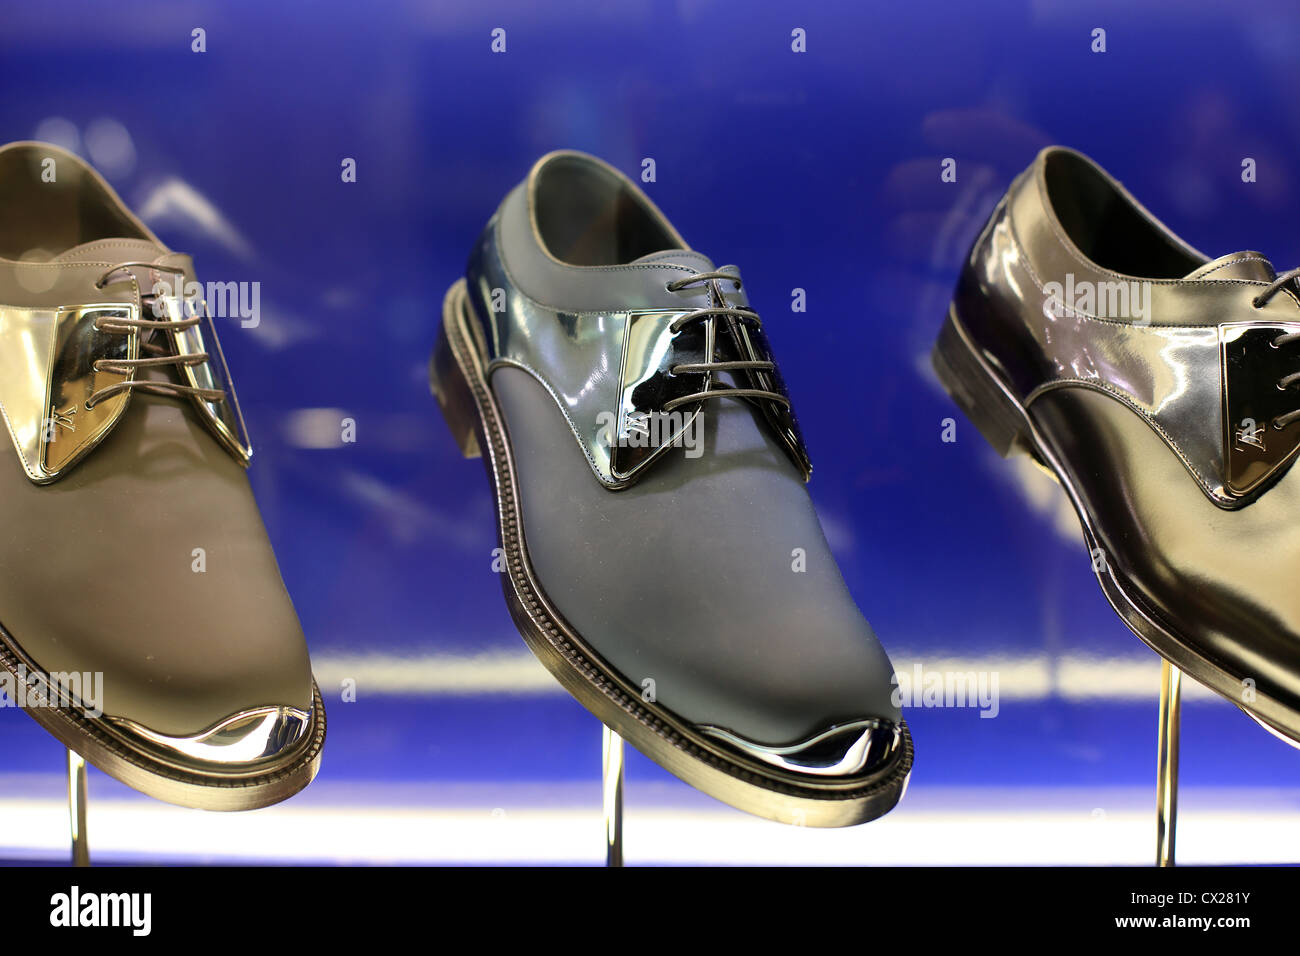 Louis Vuitton mens luxury designer label footwear on display at a boutique in Singapore. Stock Photo